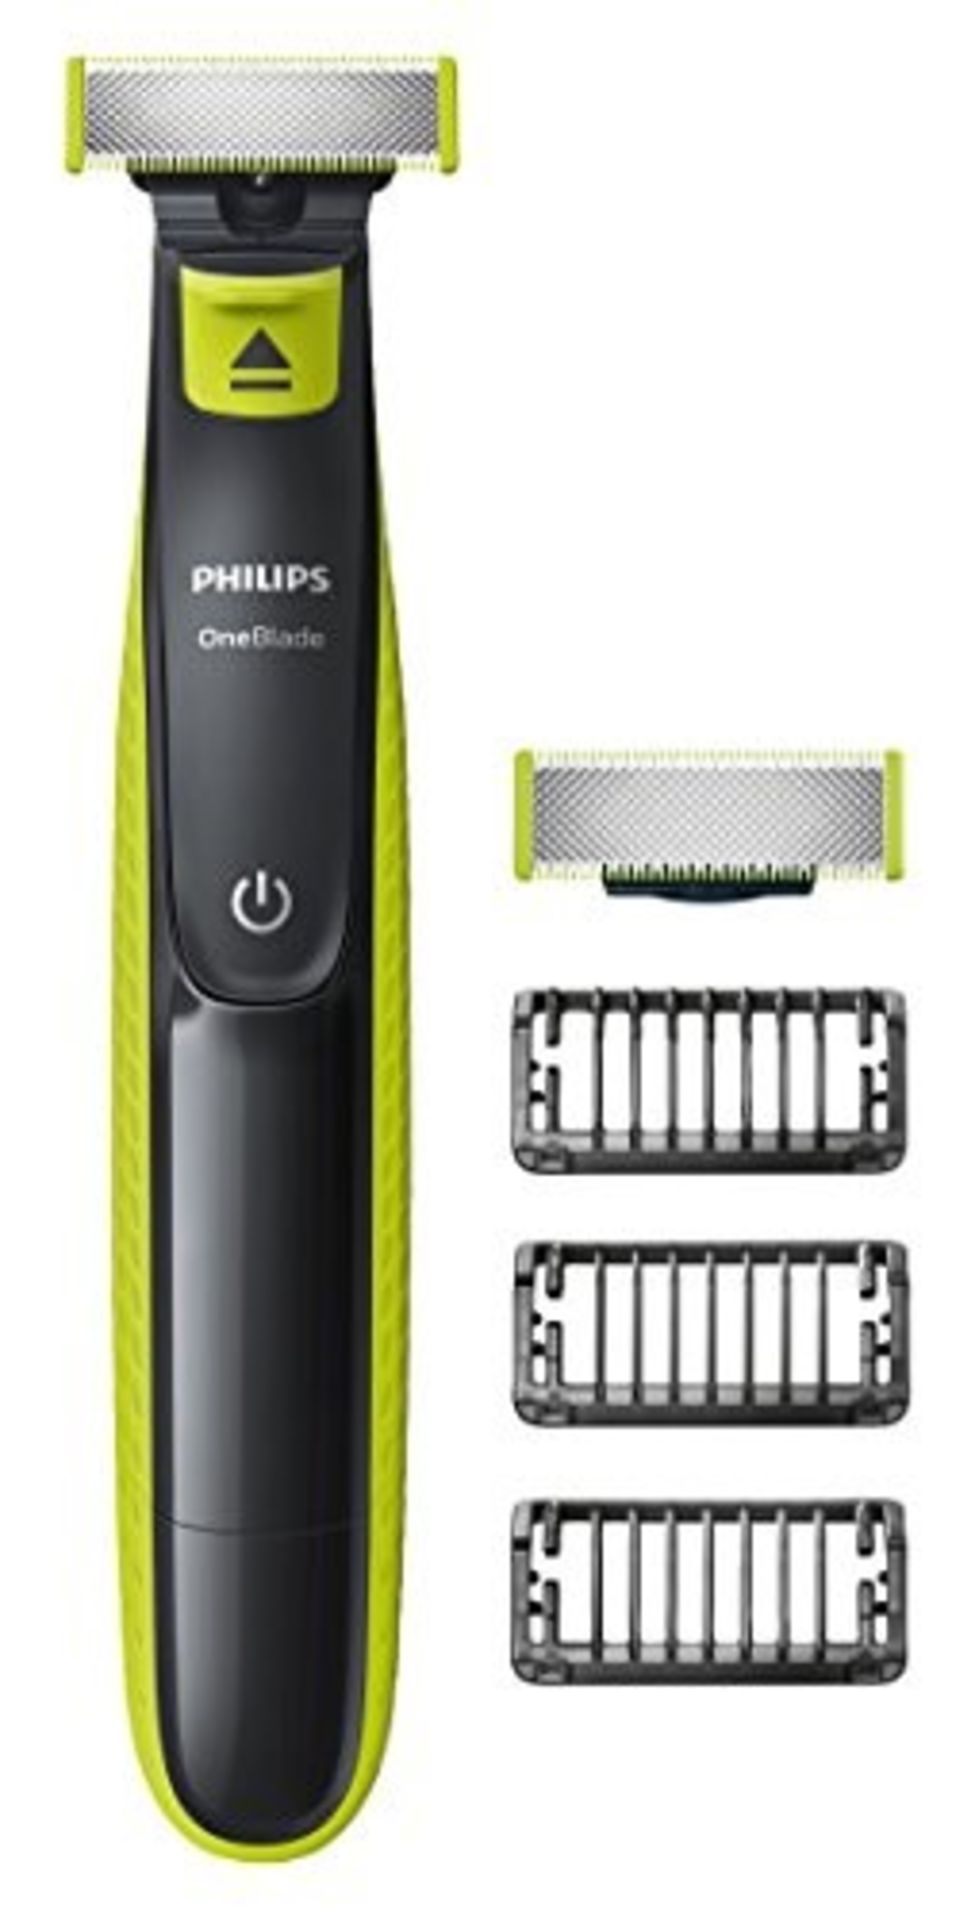 Philips OneBlade Hybrid Stubble Trimmer and Shaver with 3 x Lengths and One Extra Blad